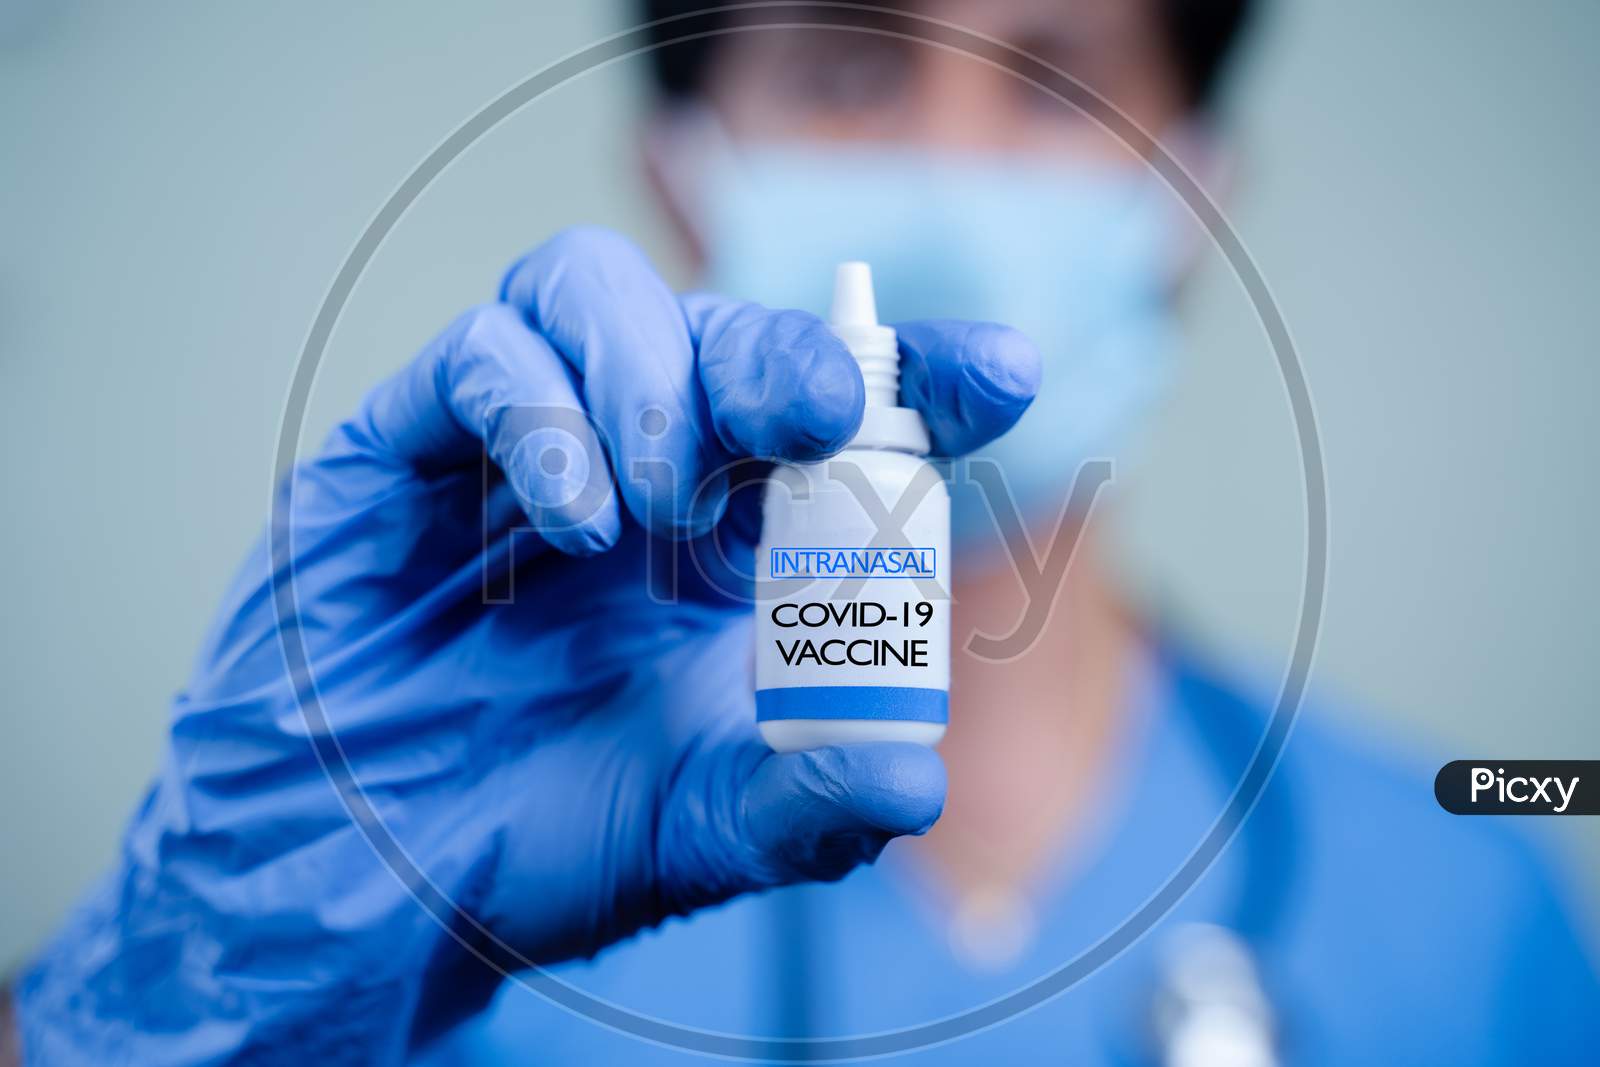 Close Up Hands Of Doctor Or Nurse Holding Intranasal Vaccine Spary Bottle For Coronavirus Or Covid-19 Pandemic